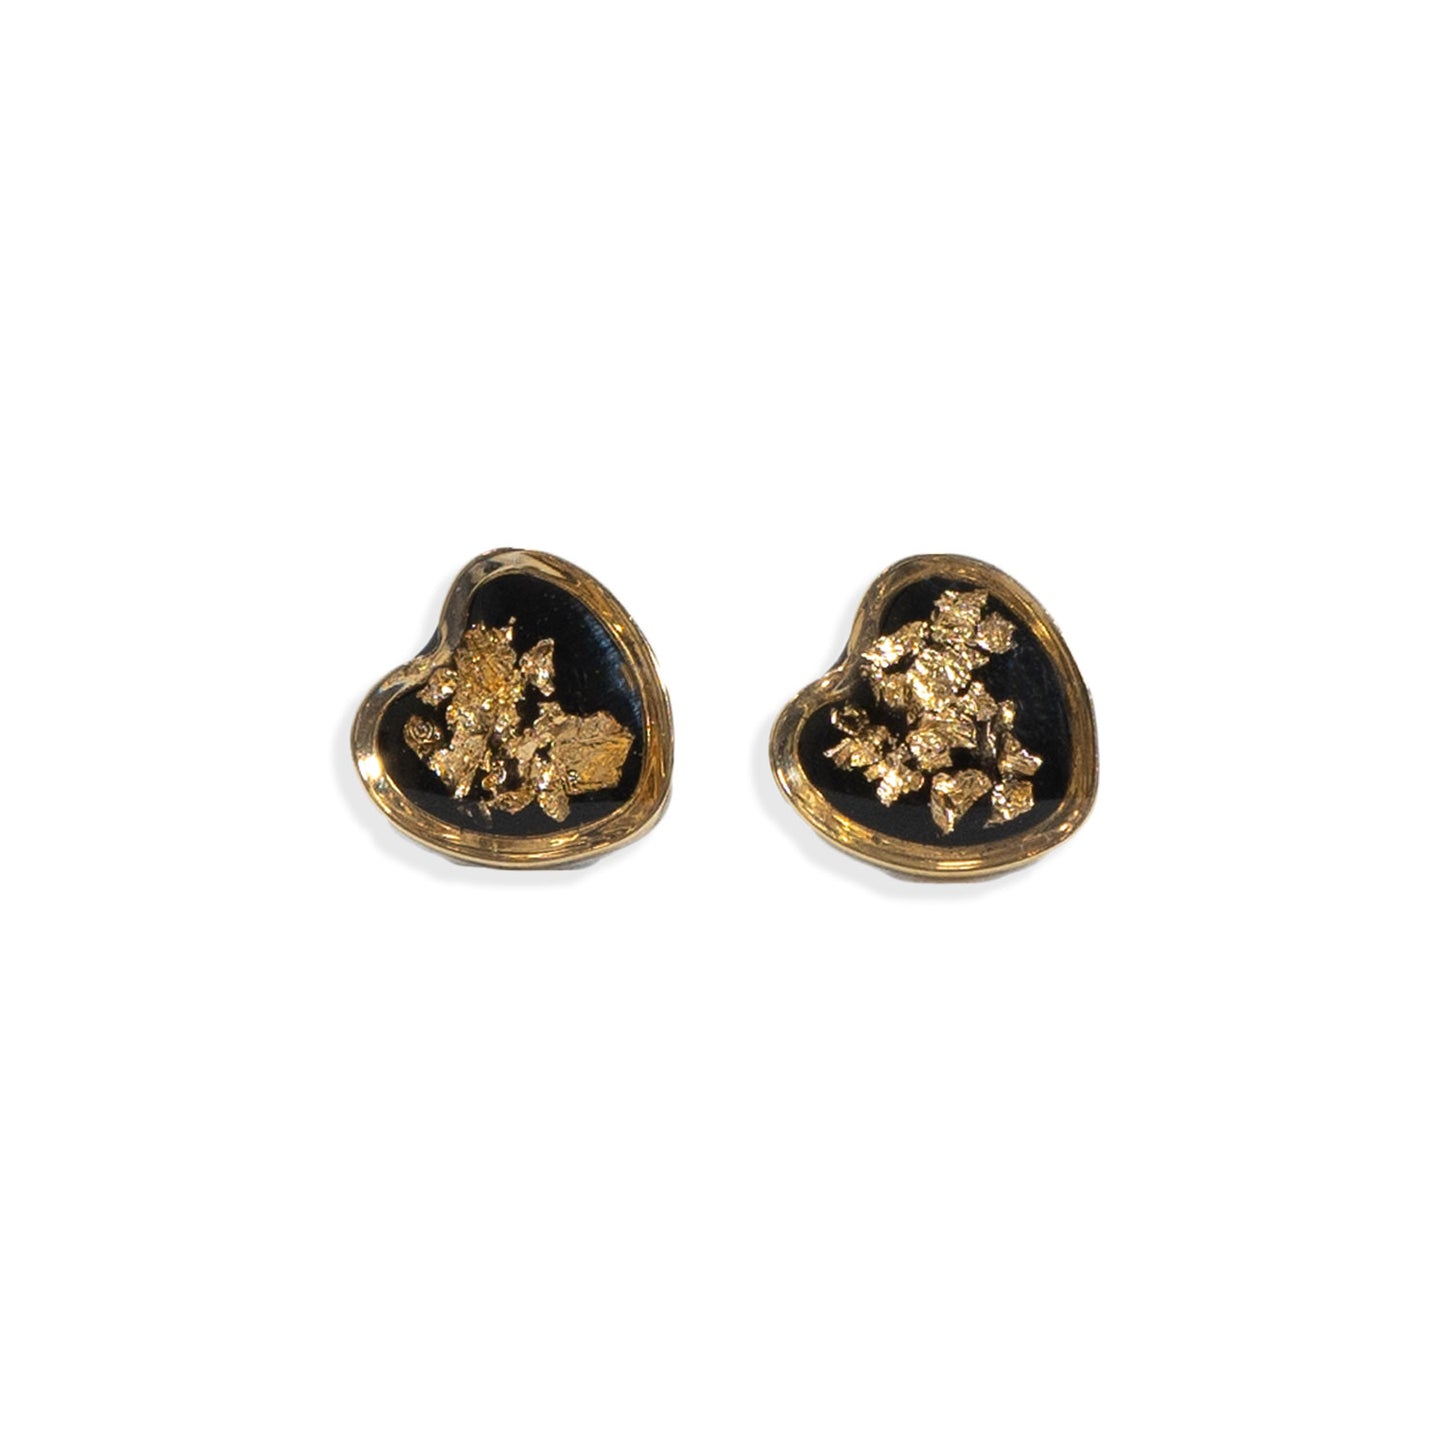 Small Heart Stud Earrings black and gold